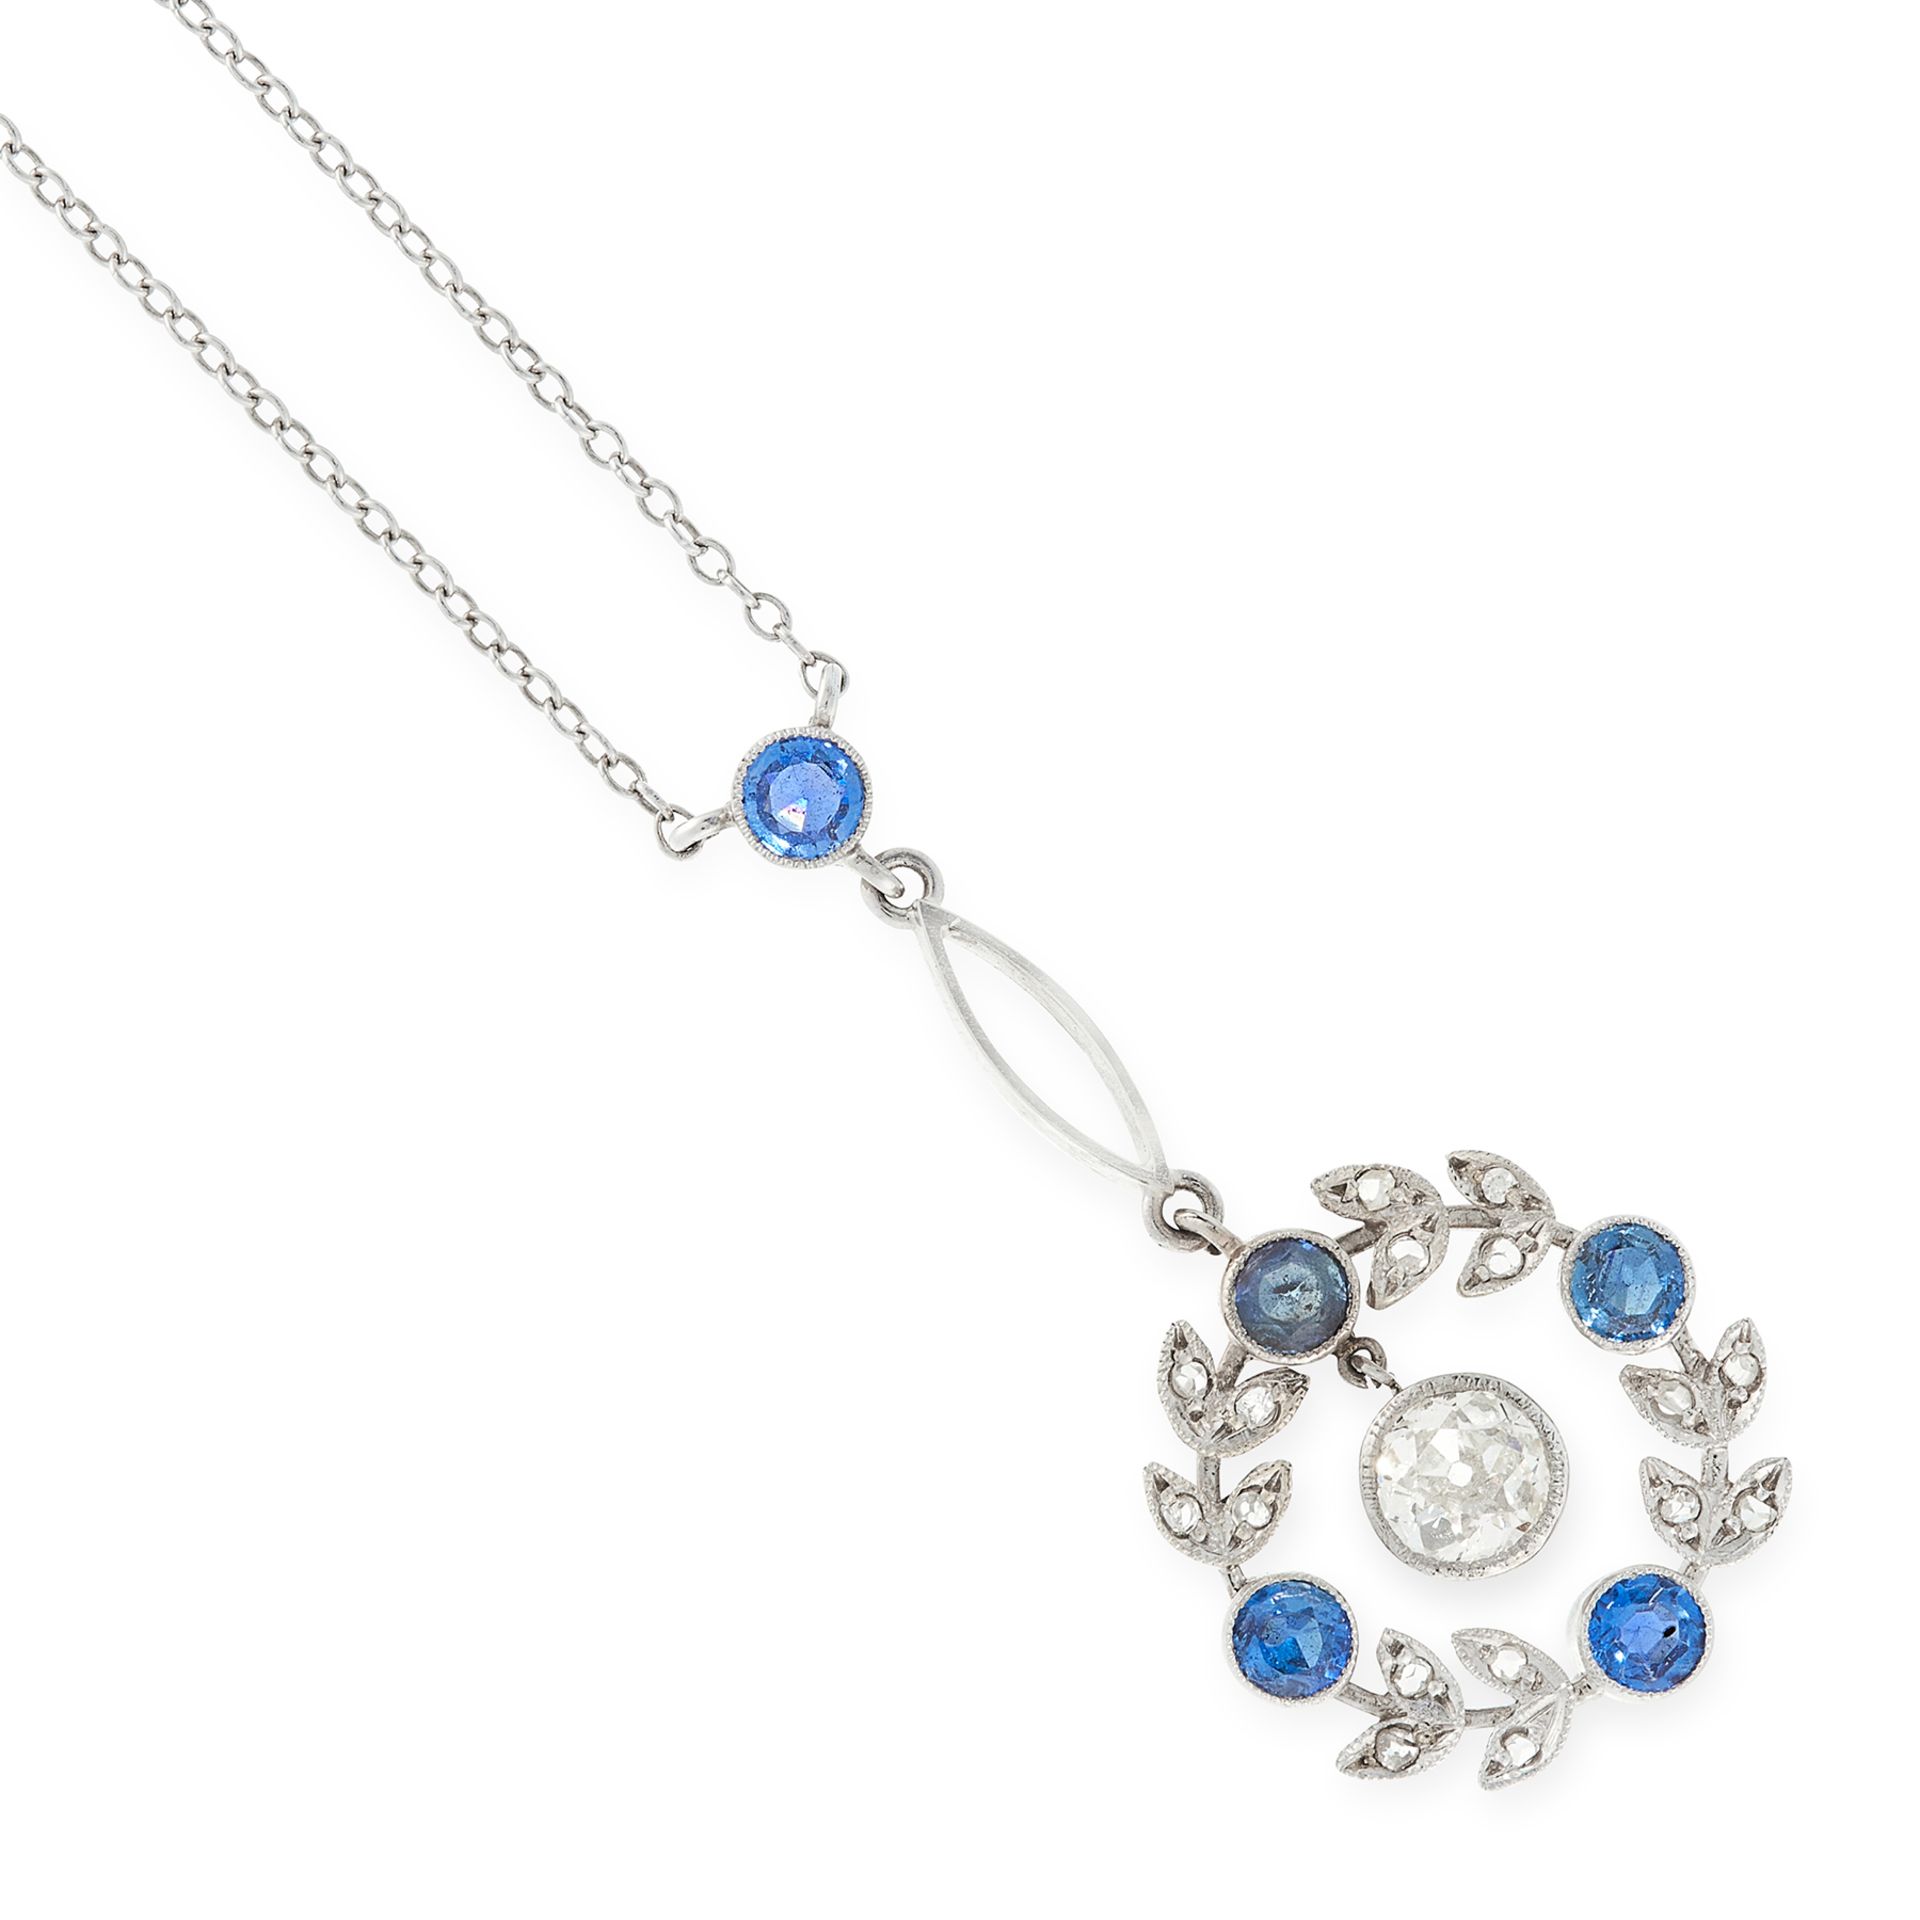 A DIAMOND AND SAPPHIRE PENDANT NECKLACE set with an old cut diamond of 0.55 carats, suspended within - Image 2 of 2